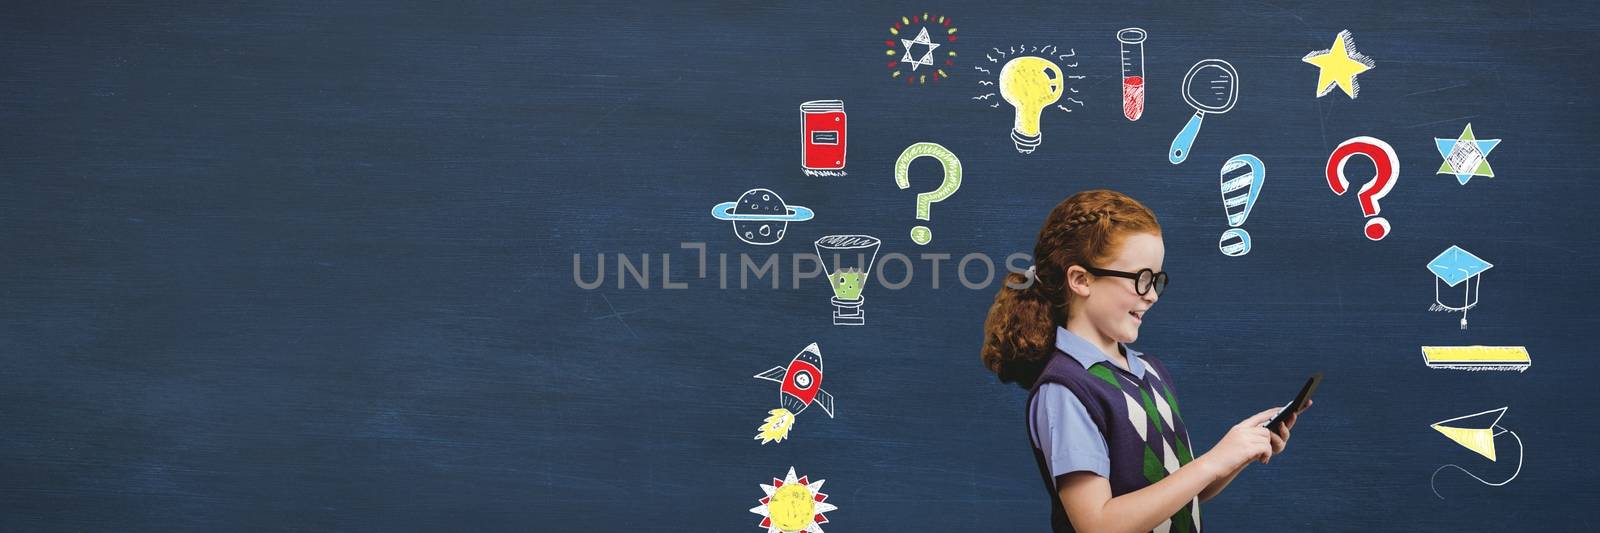 Digital composite of School boy and School girl holding phone and Education drawing on blackboard for school